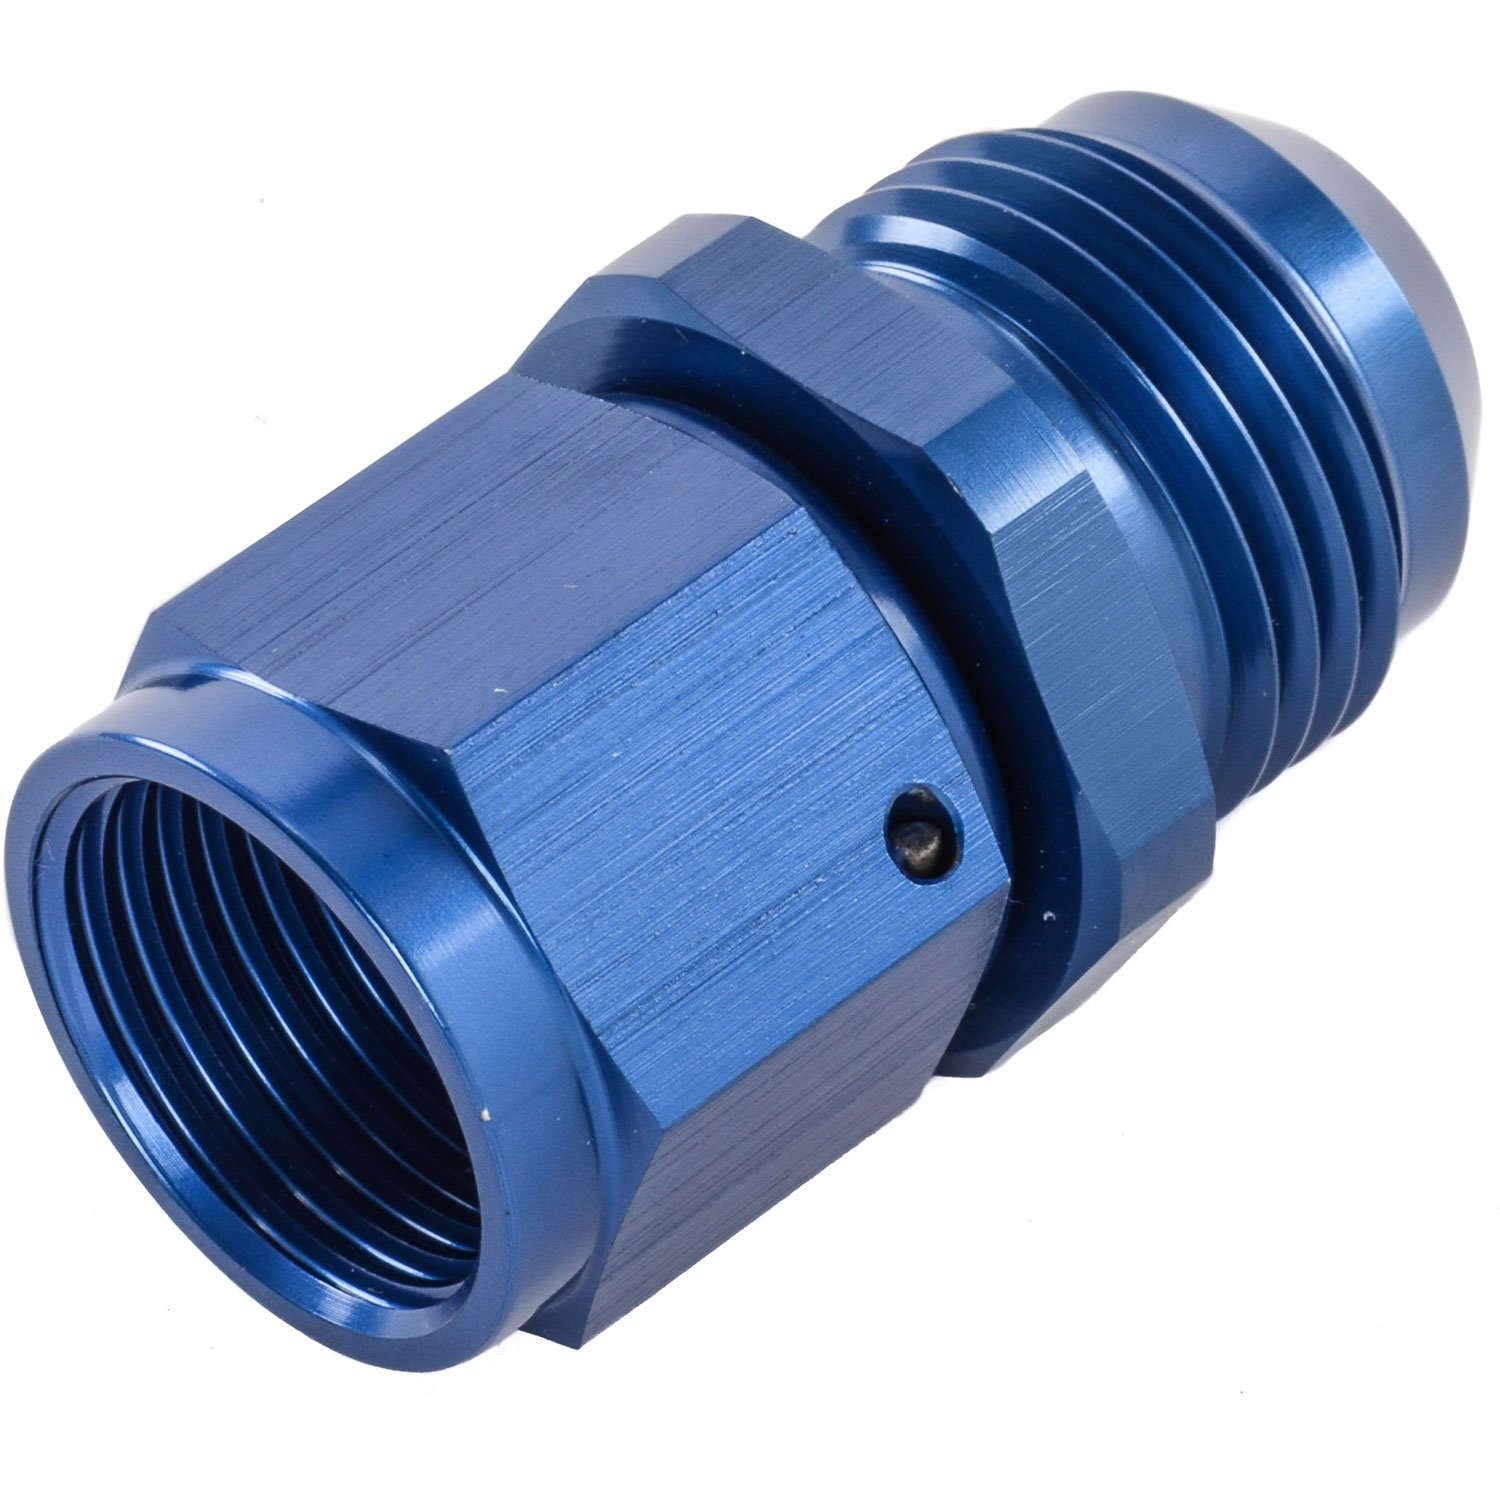 AN Female Swivel to Male Expander Fitting [-8 AN Female to -10 AN Male, Blue Hard Anodized]